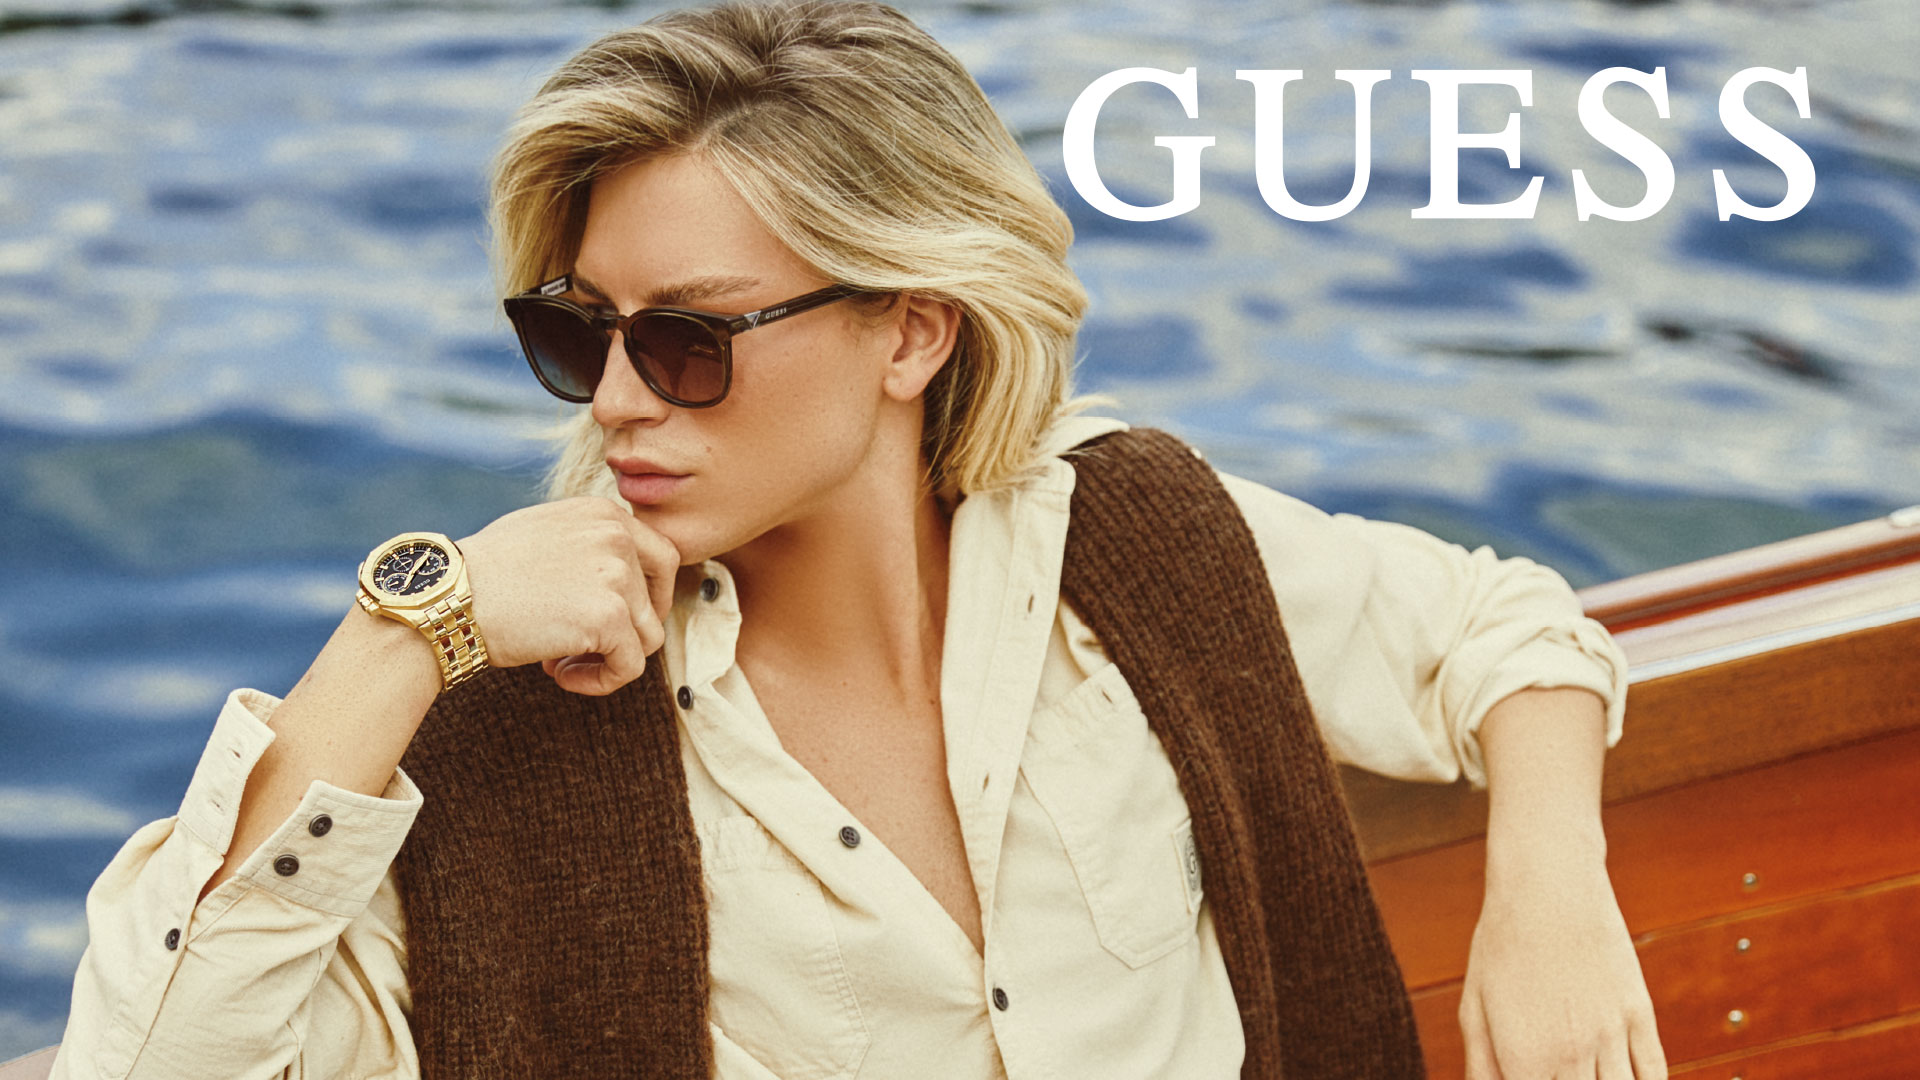 GUESS-FW21-1920-X-1080-3-OPT-08581